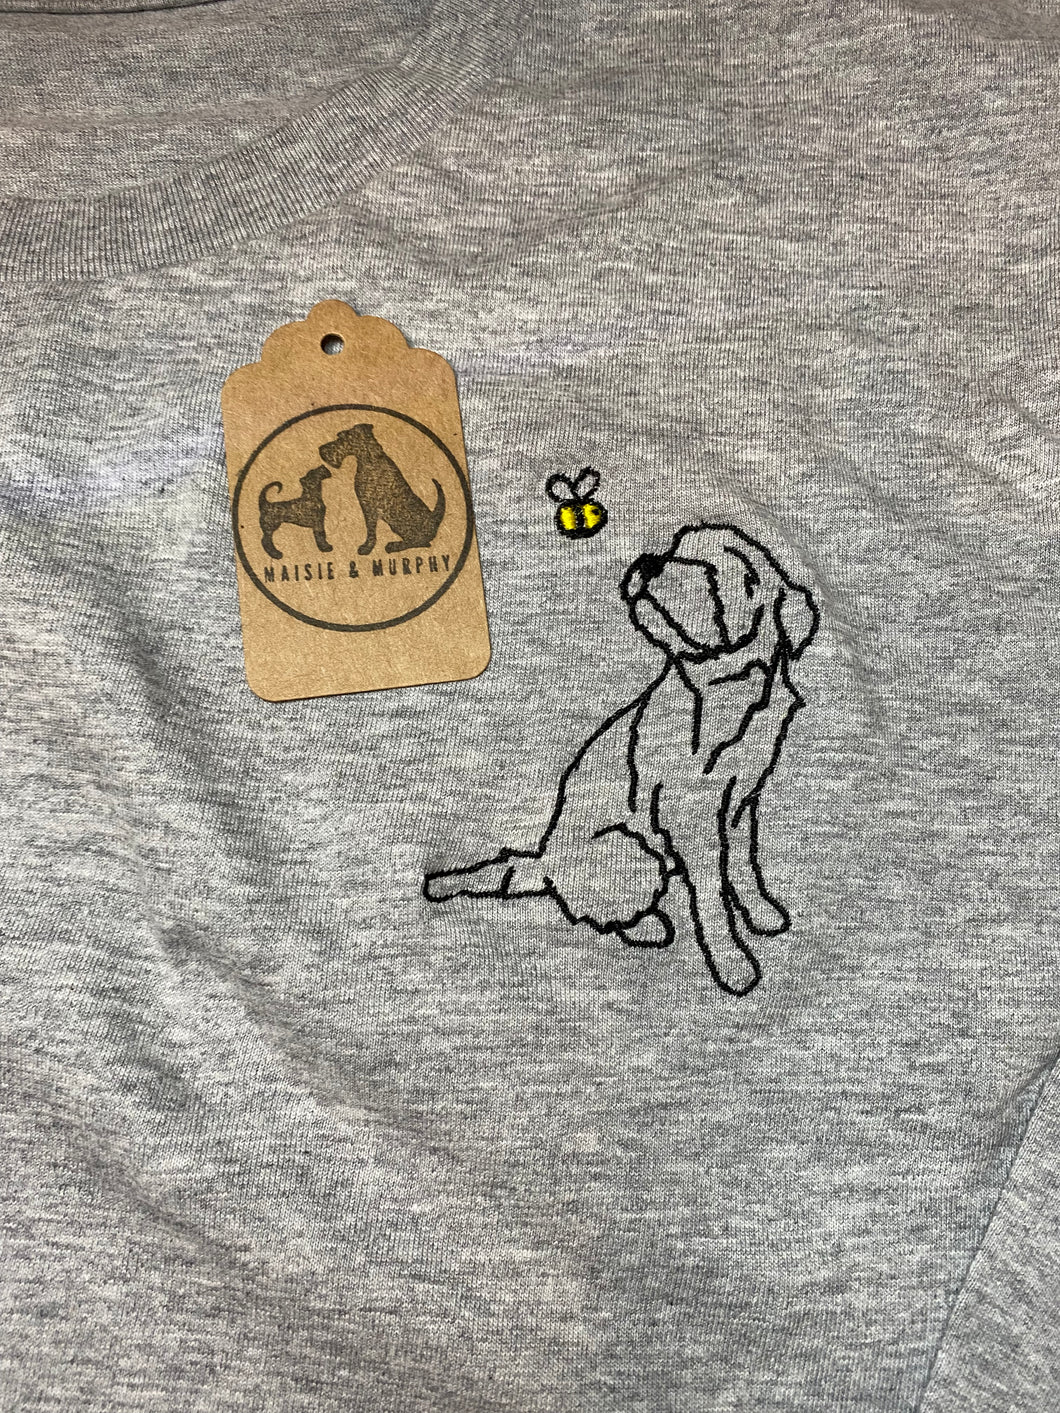 Border Terrier Outline T-shirt - embroidered terrier organic tee for dog lovers and owners